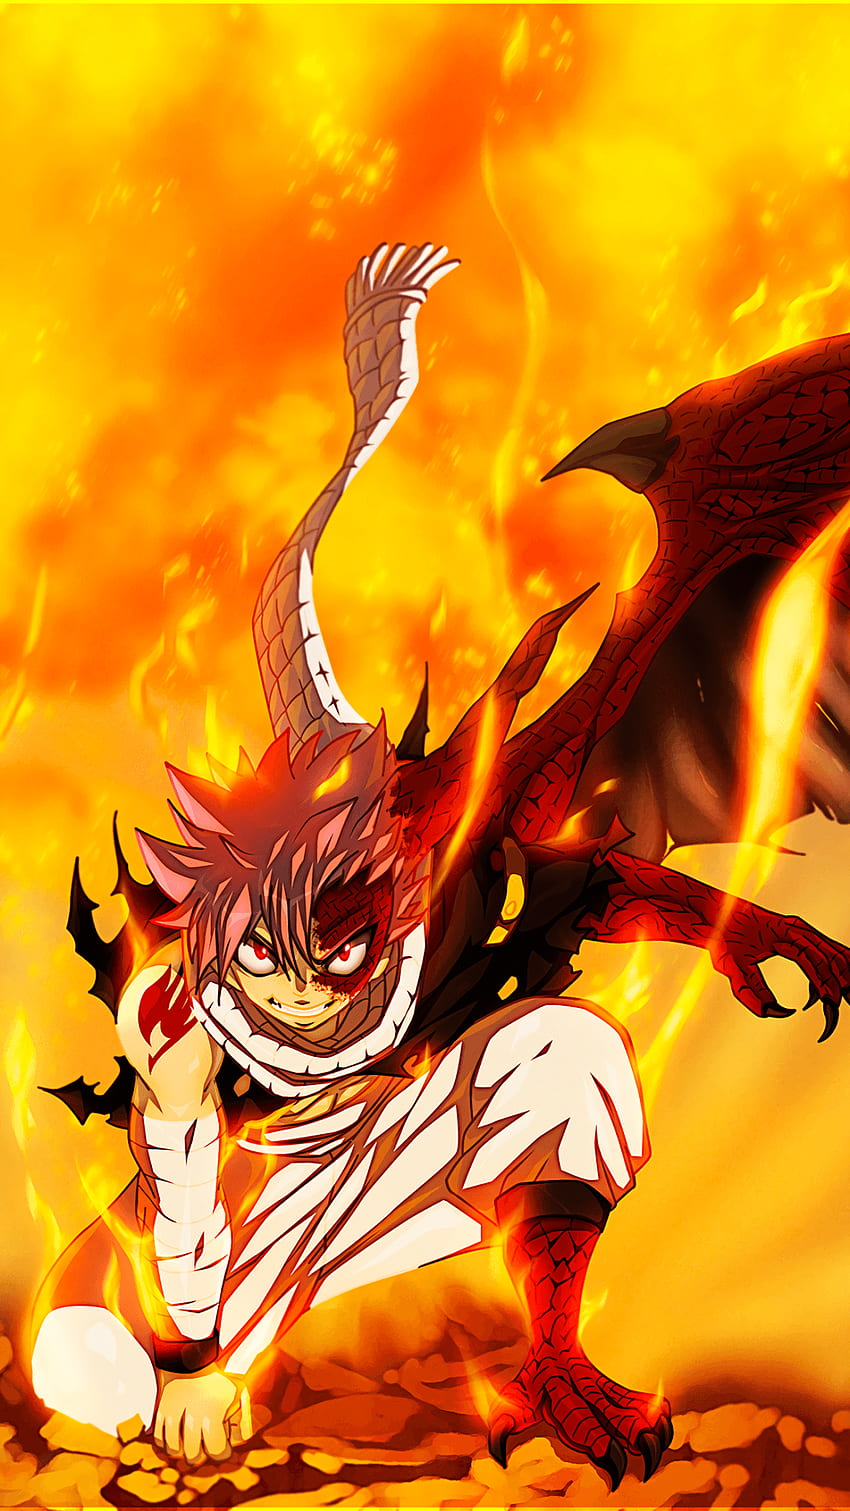 Anime Fairy Tail Natsu Dragneel Fire Mobile . ANIME is, Fairy Tail iPhone HD phone wallpaper